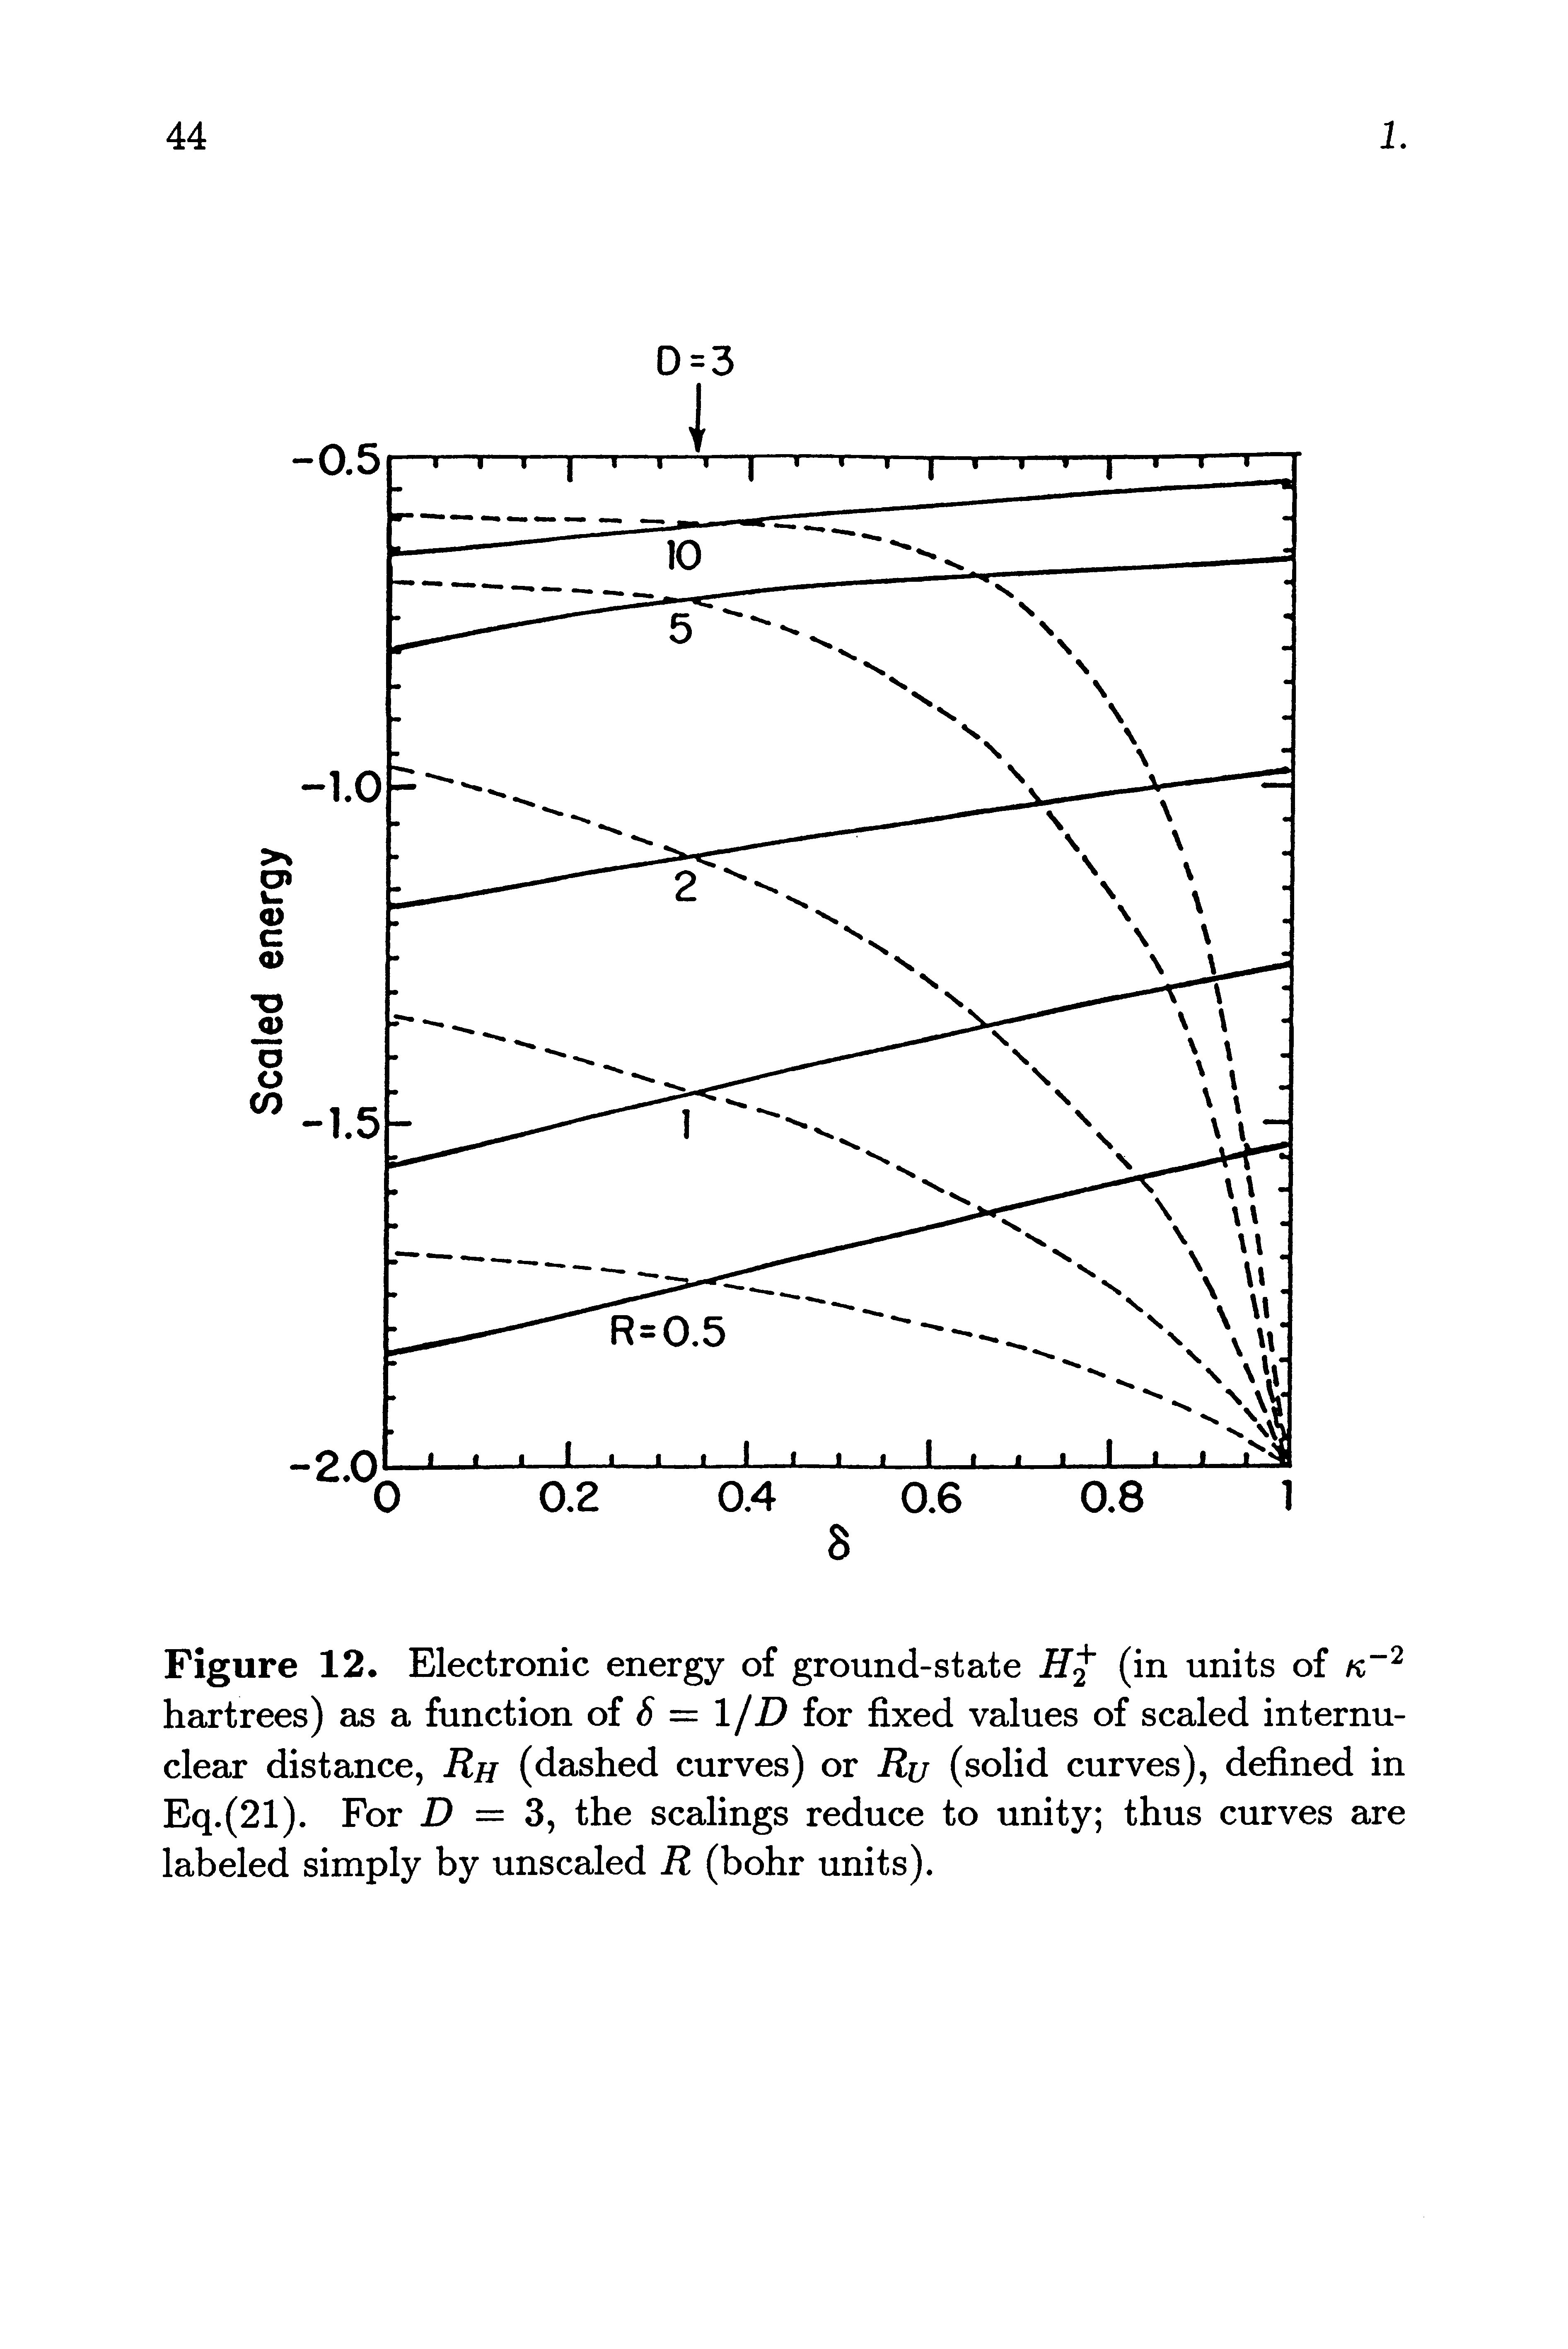 Figure 12. Electronic energy of ground-state (in units of hartrees) as a function of = 1/i for fixed values of scaled internu-clear distance, Rh (dashed curves) or Ru (solid curves), defined in Eq.(21). For JO = 3, the scalings reduce to unity thus curves are labeled simply by unsealed R (bohr units).